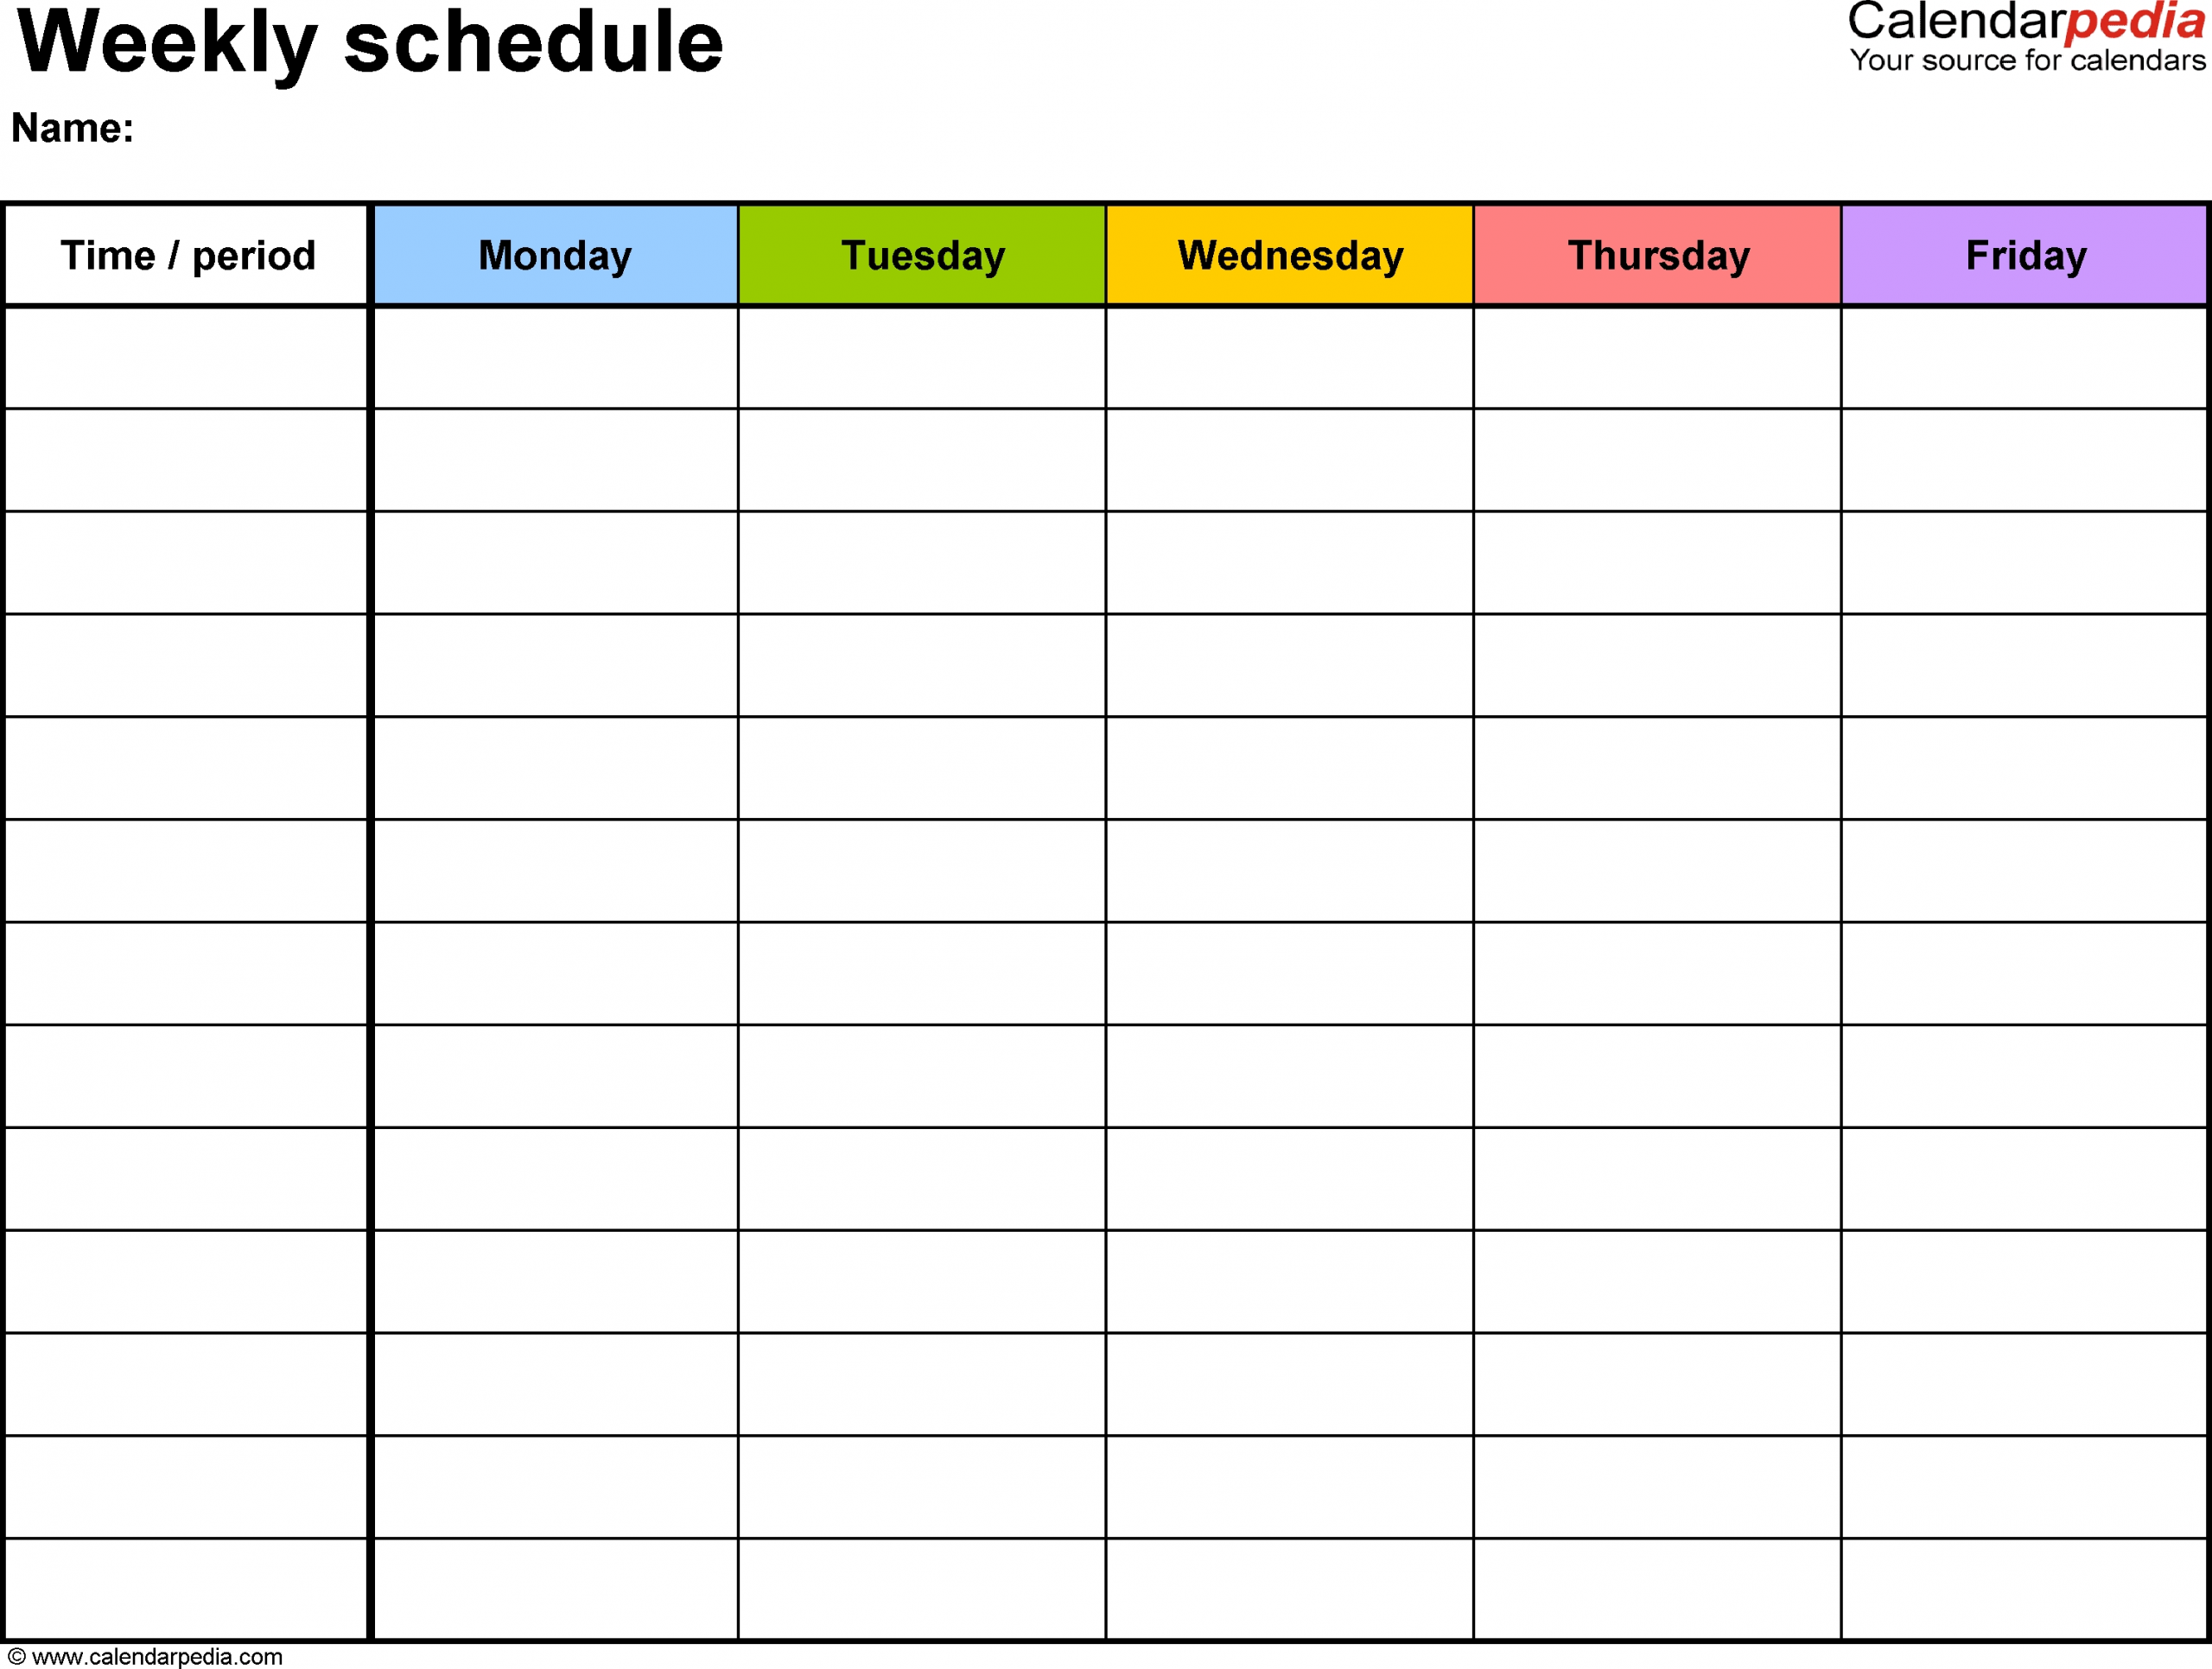 Free Weekly Schedule Templates For Word - 18 Templates Calendar Template 1 Week